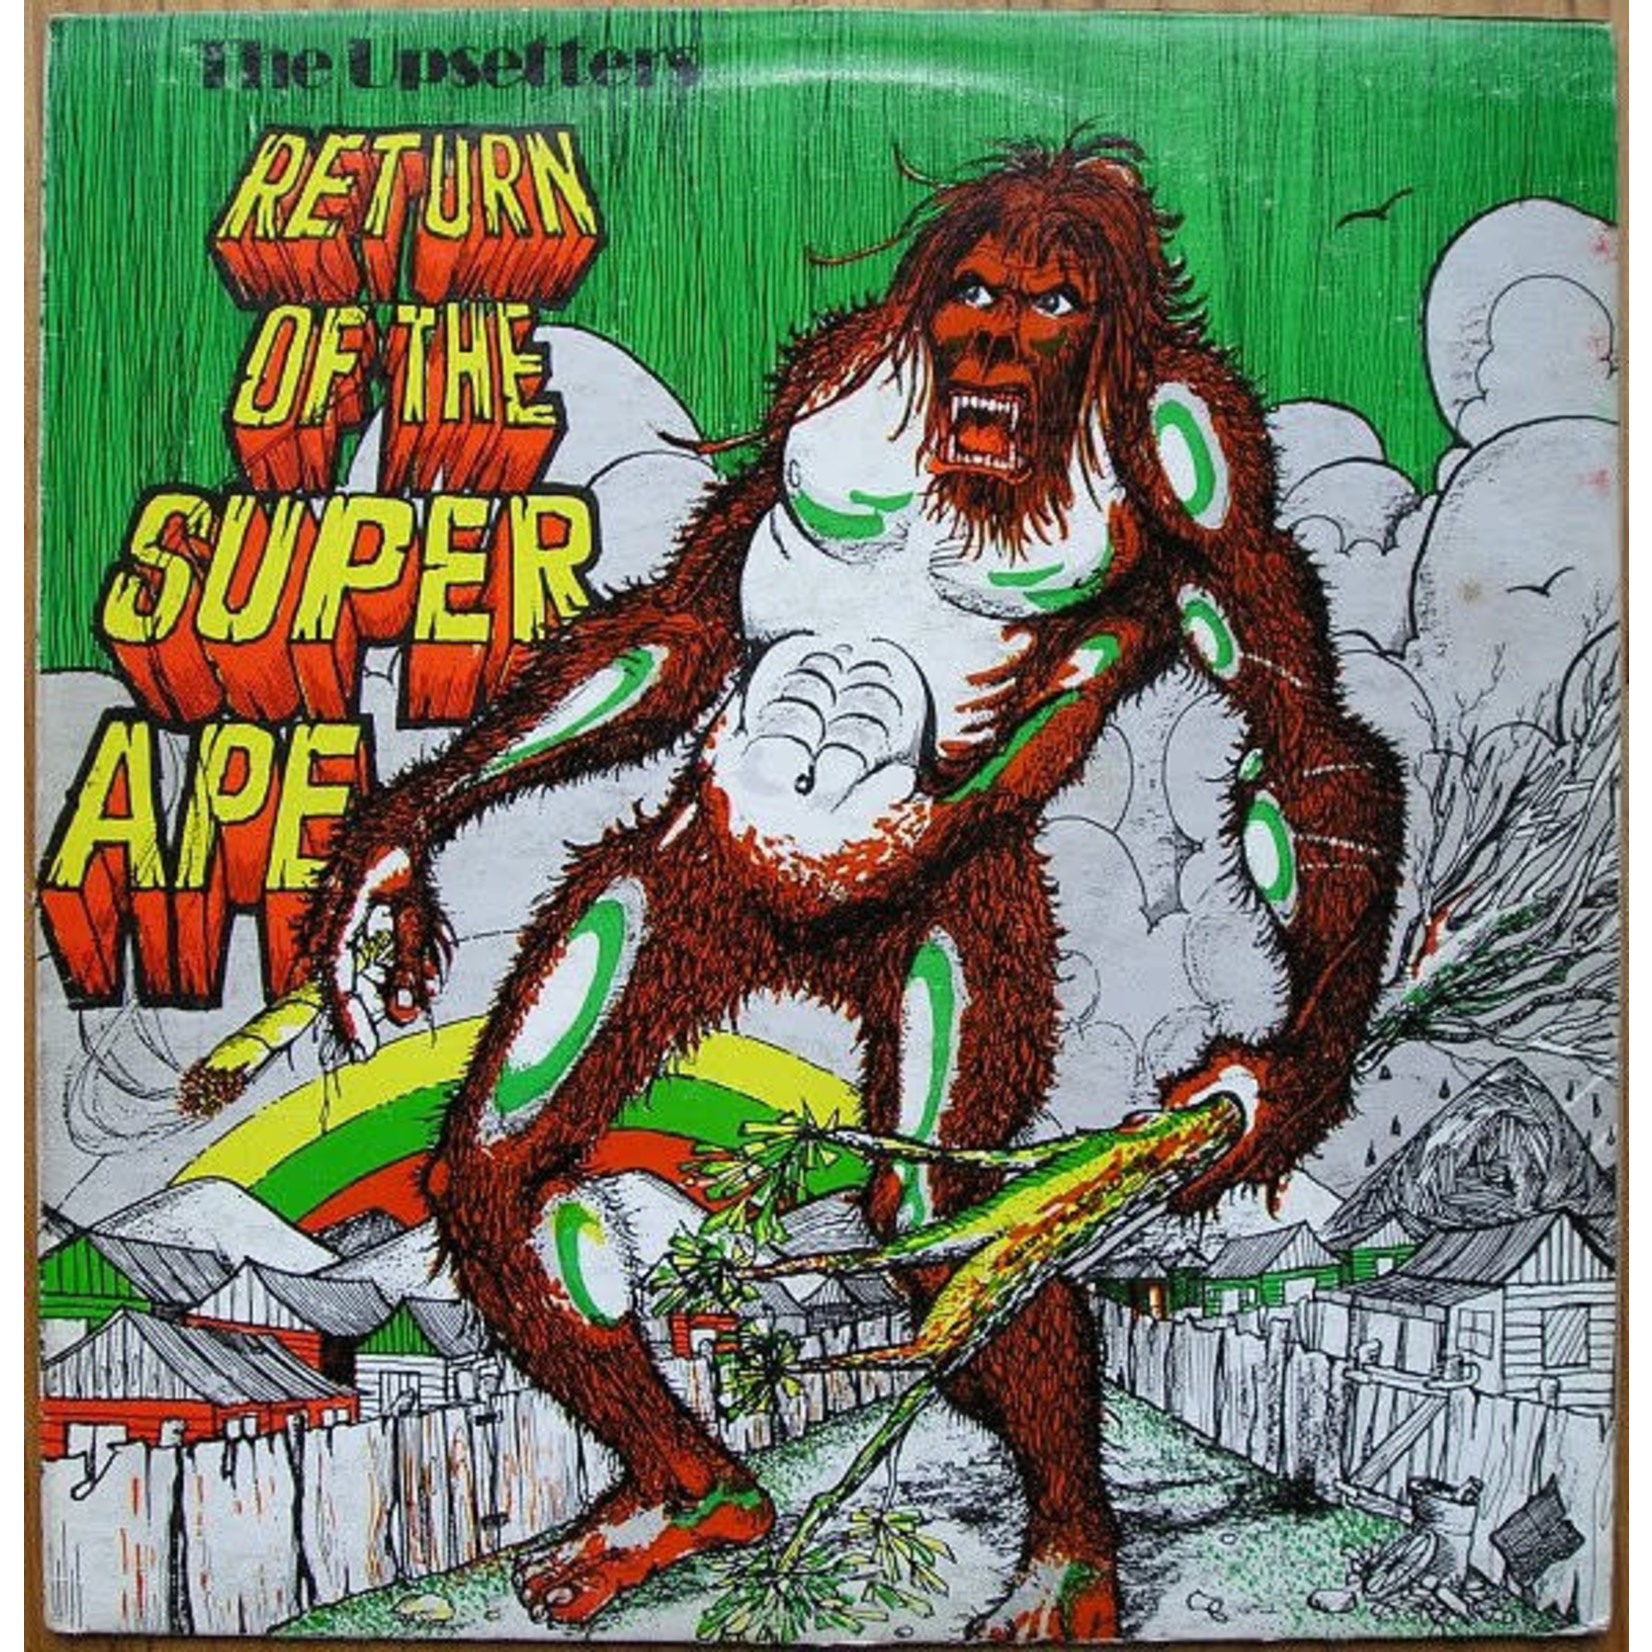 [New] Lee Scratch Perry - Return of the Super Ape